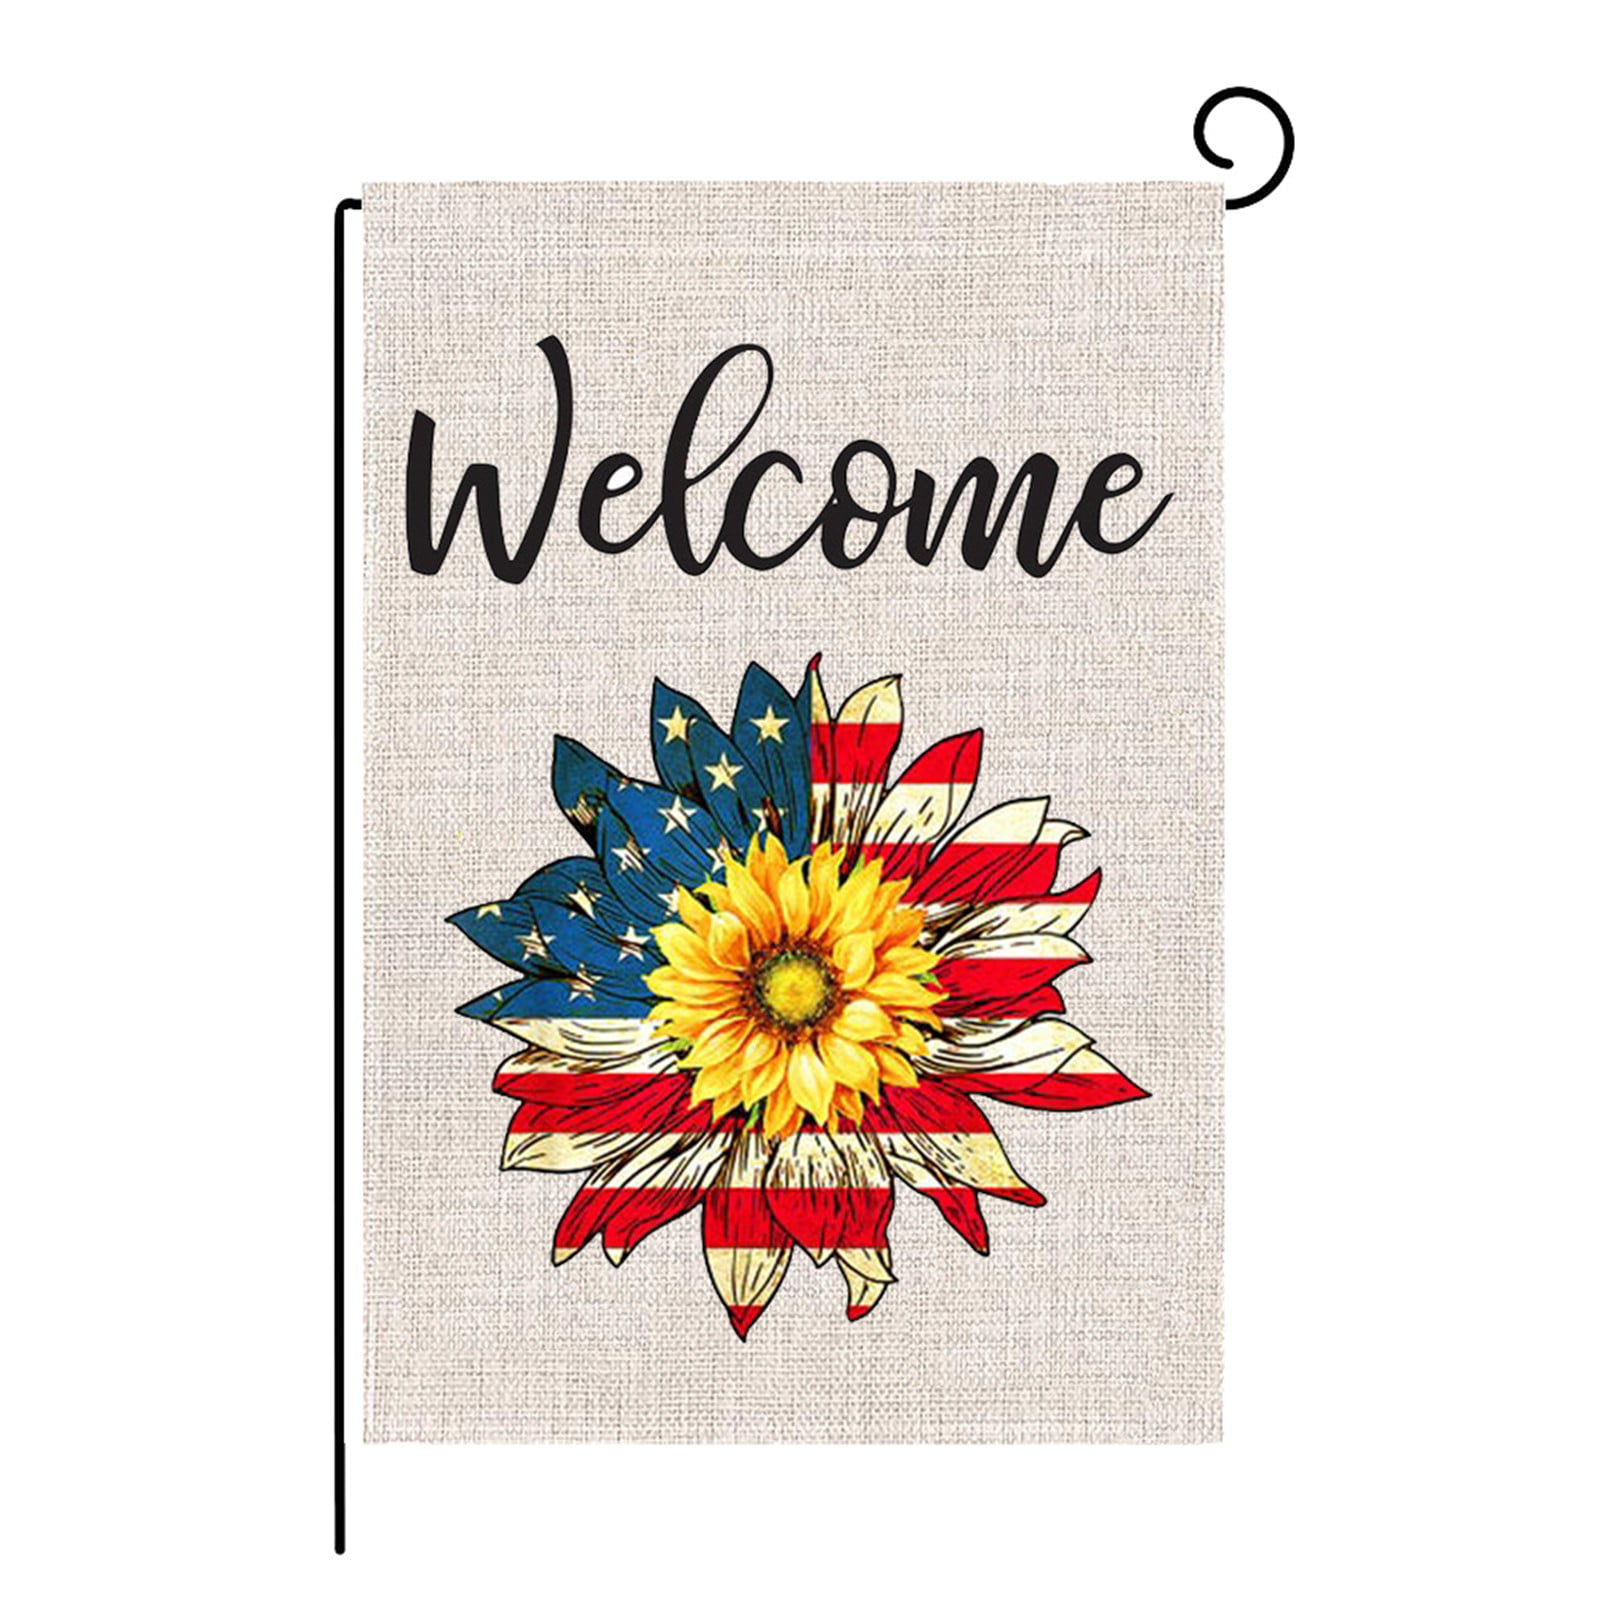 Welcome Cute Dog Wearing a Sunflower Garden Flag House Double-sided Yard Banner 